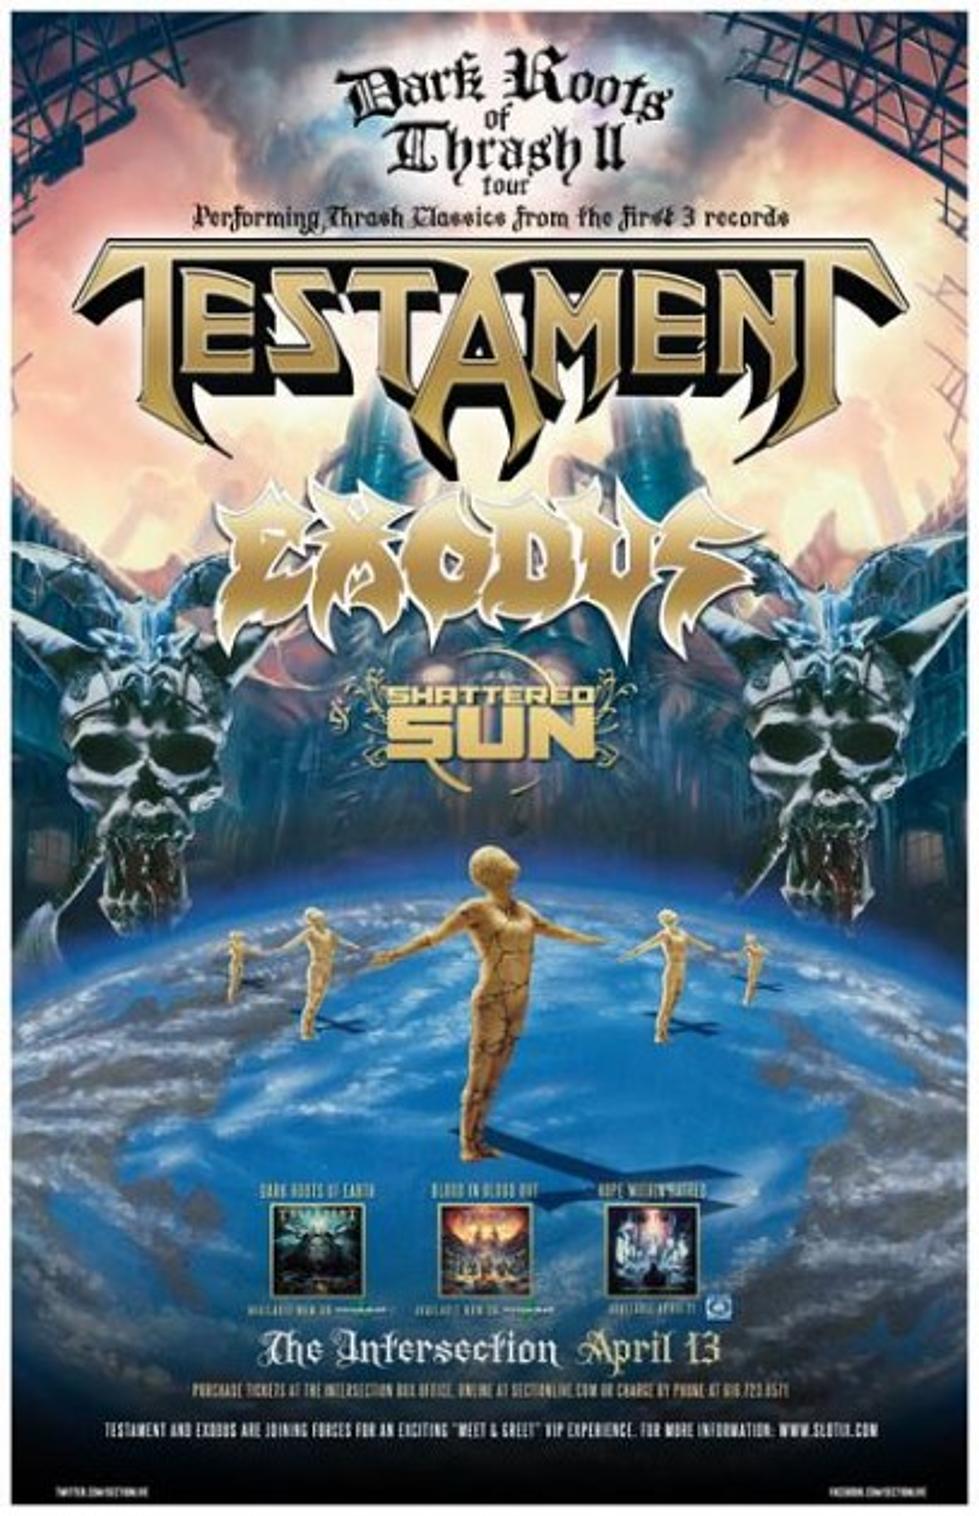 Testament, Exodus, Shattered Sun Bring Their Metal to The Intersection on April 13 [Video]